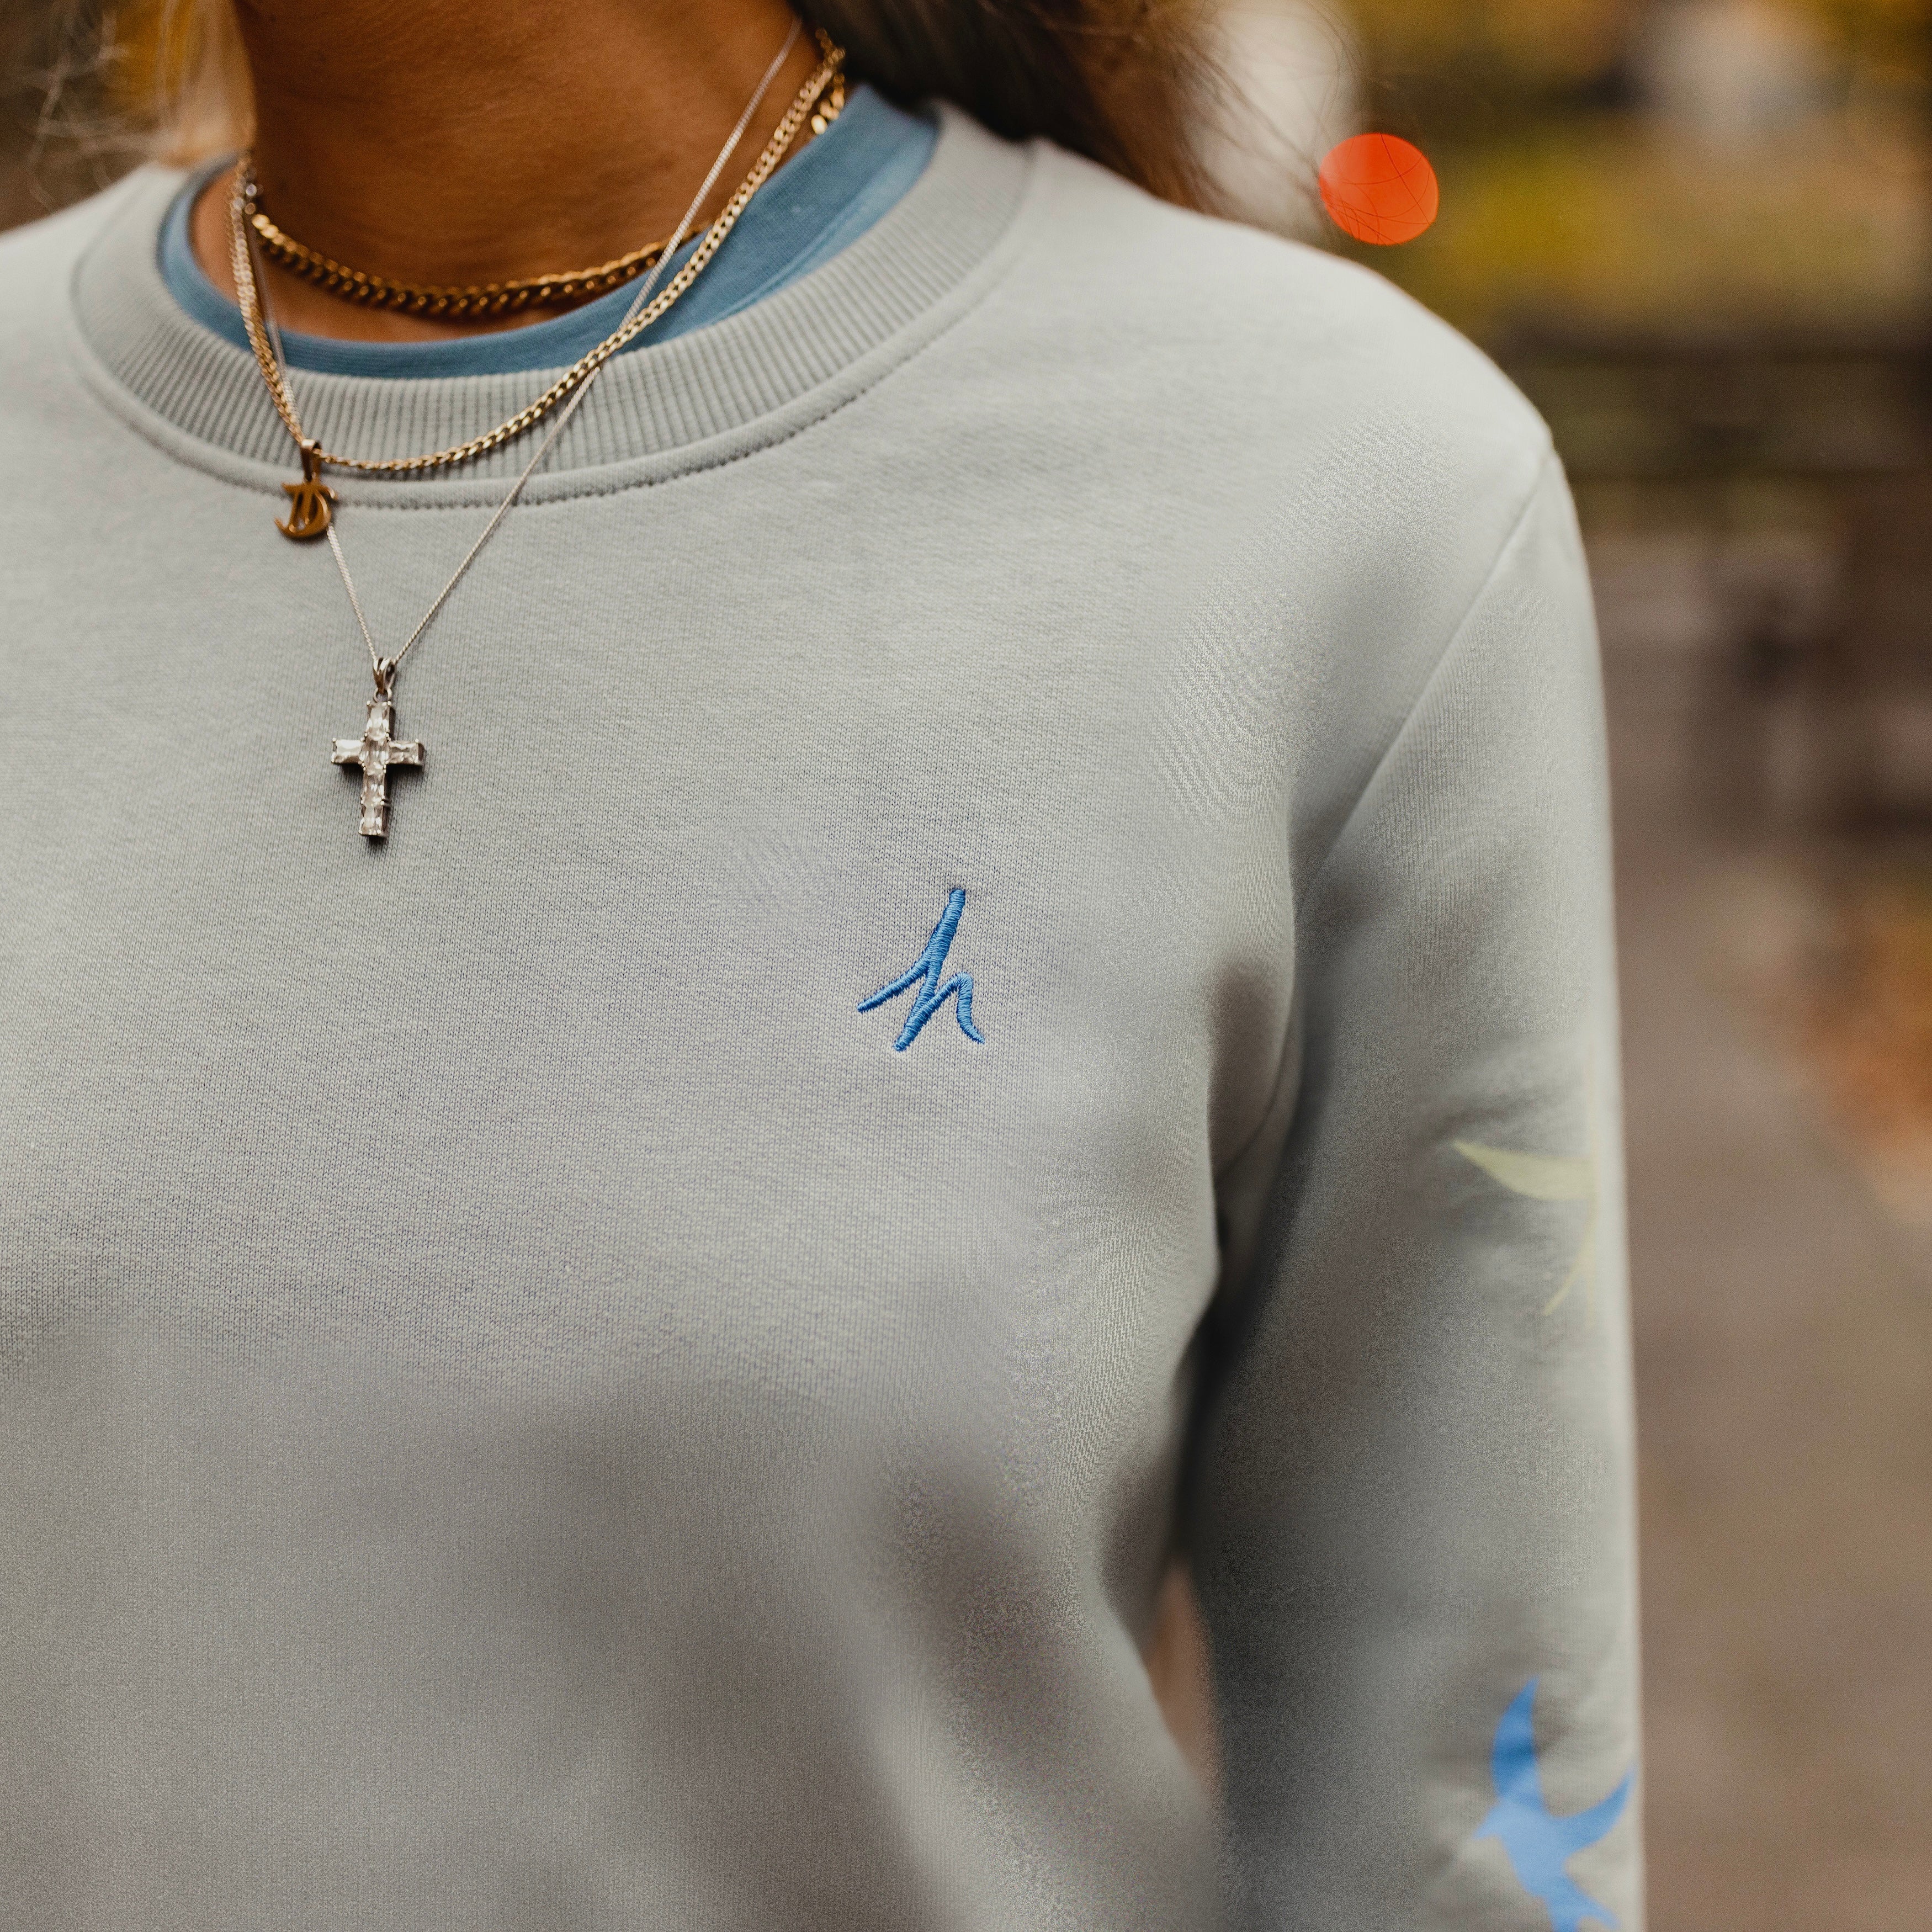 h clothing - close up of female model wearing heather grey sweatshirt with blue h logo on left breast